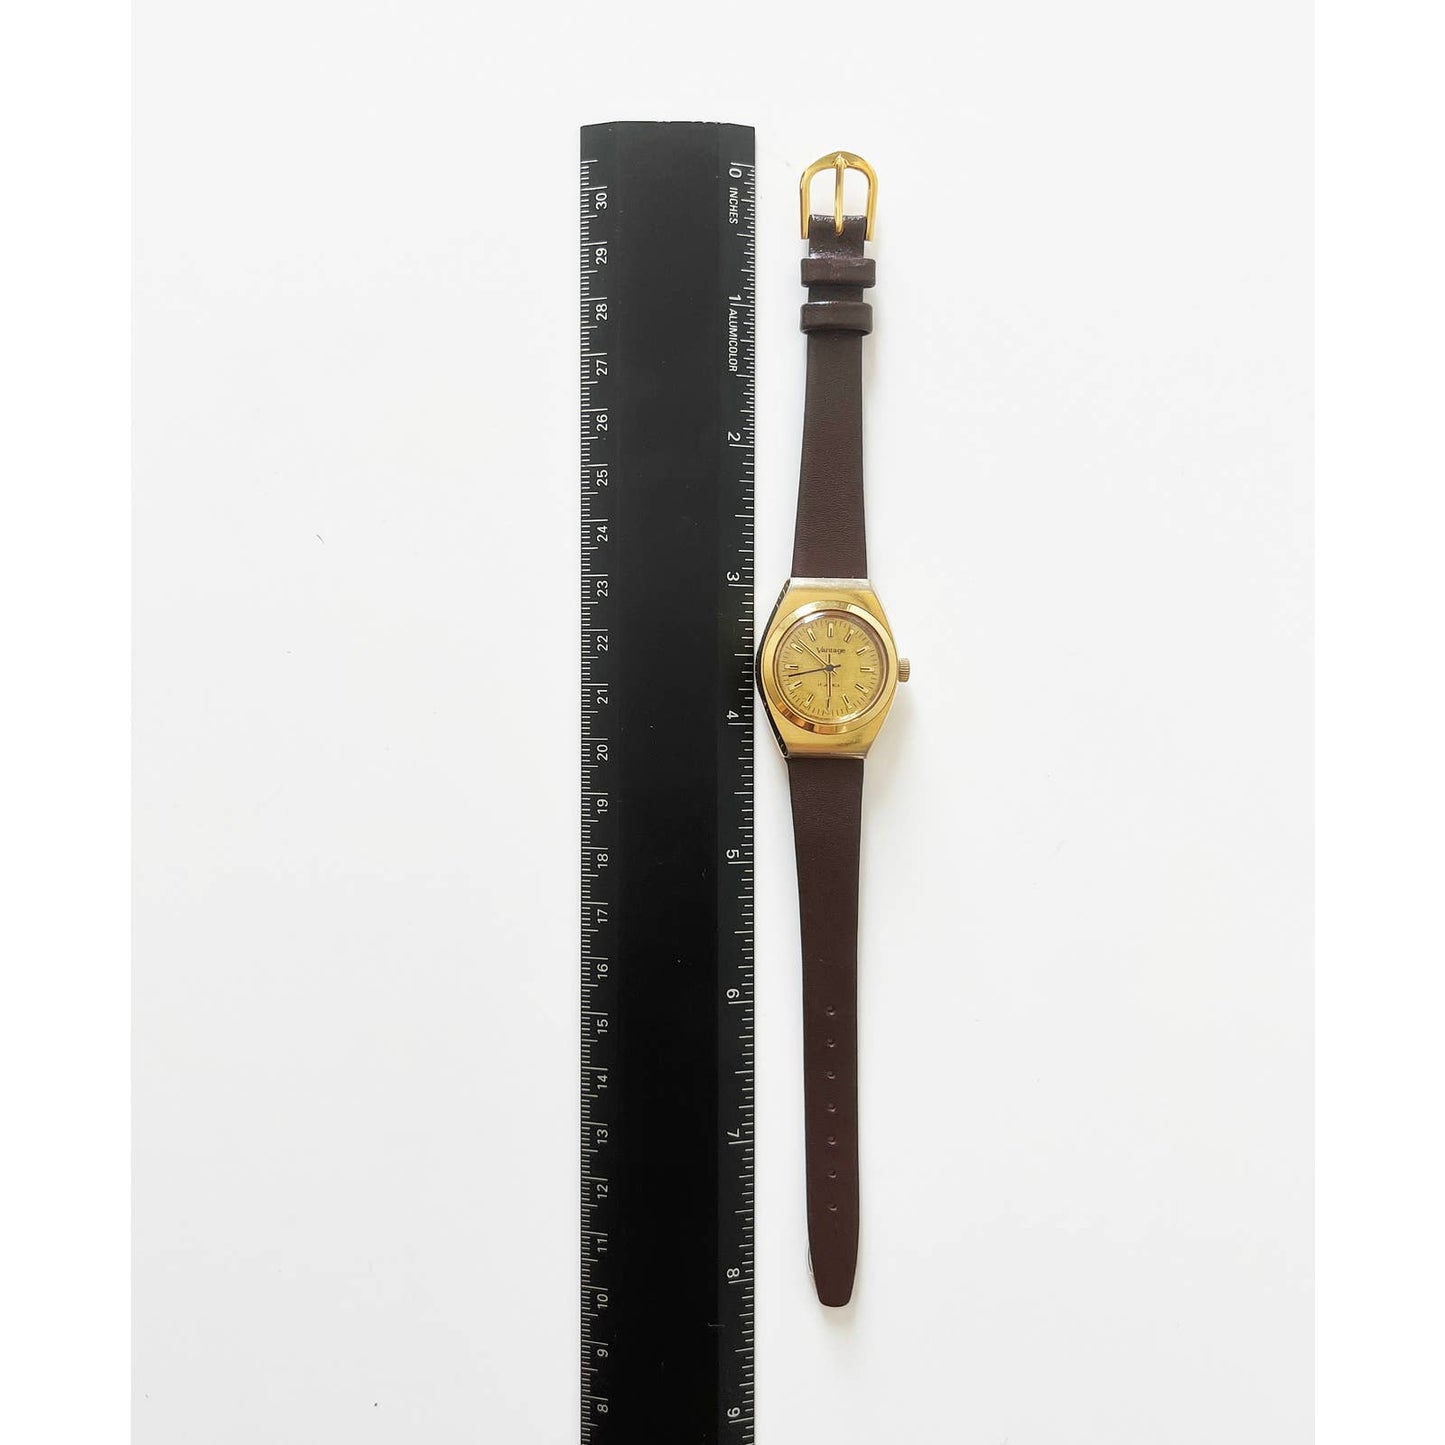 Vintage Leather Vantage Watch with Gold Details | Manual Wide with New Leather Band